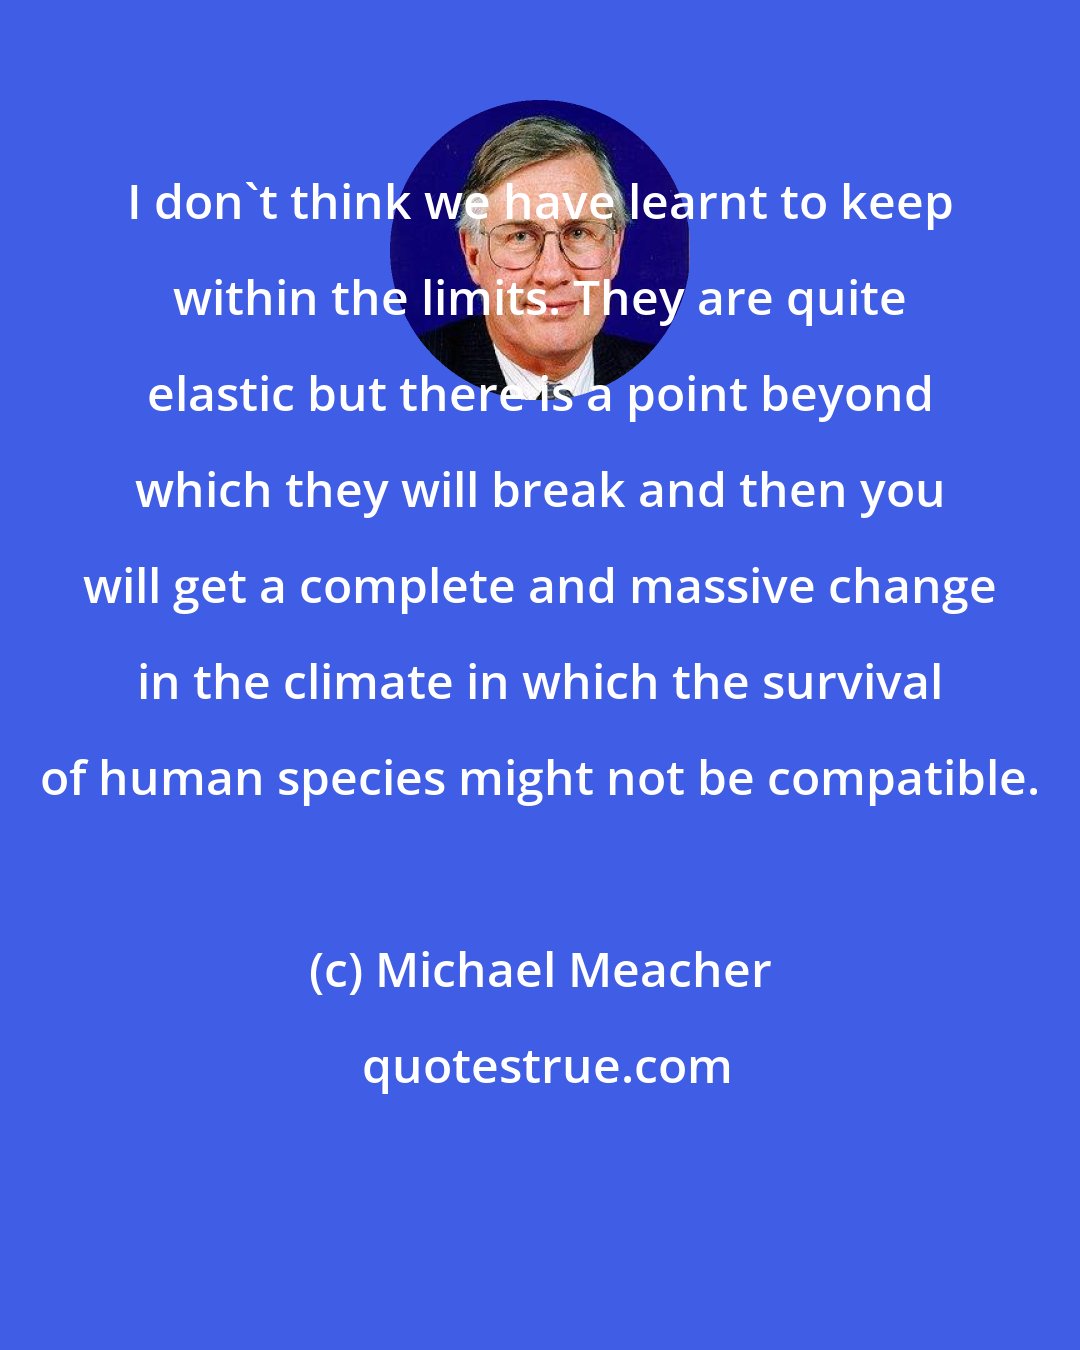 Michael Meacher: I don't think we have learnt to keep within the limits. They are quite elastic but there is a point beyond which they will break and then you will get a complete and massive change in the climate in which the survival of human species might not be compatible.